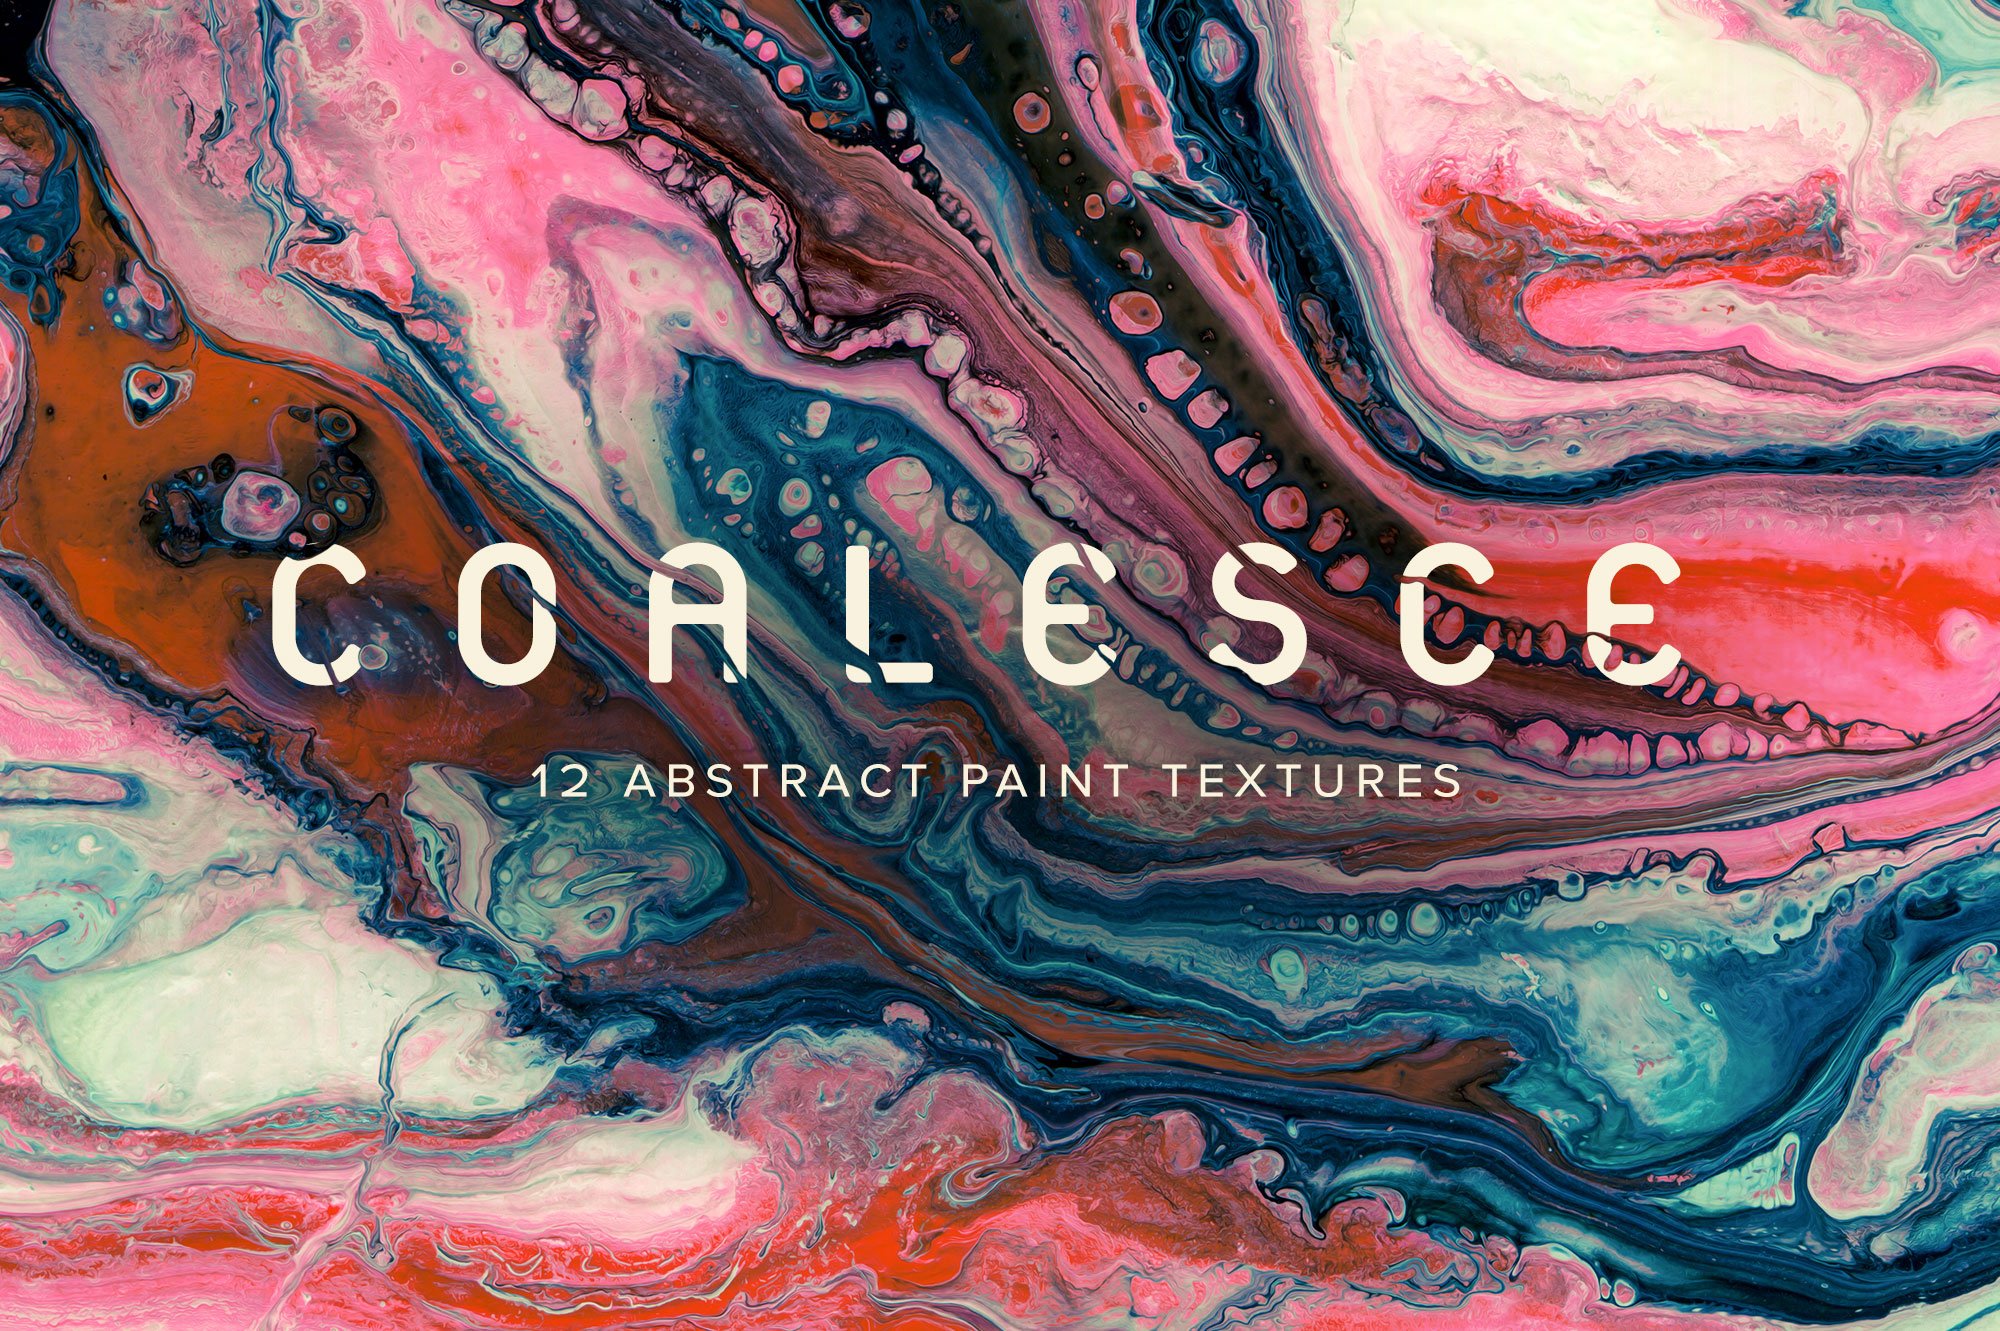 Coalesce: 12 Abstract Paint Textures cover image.